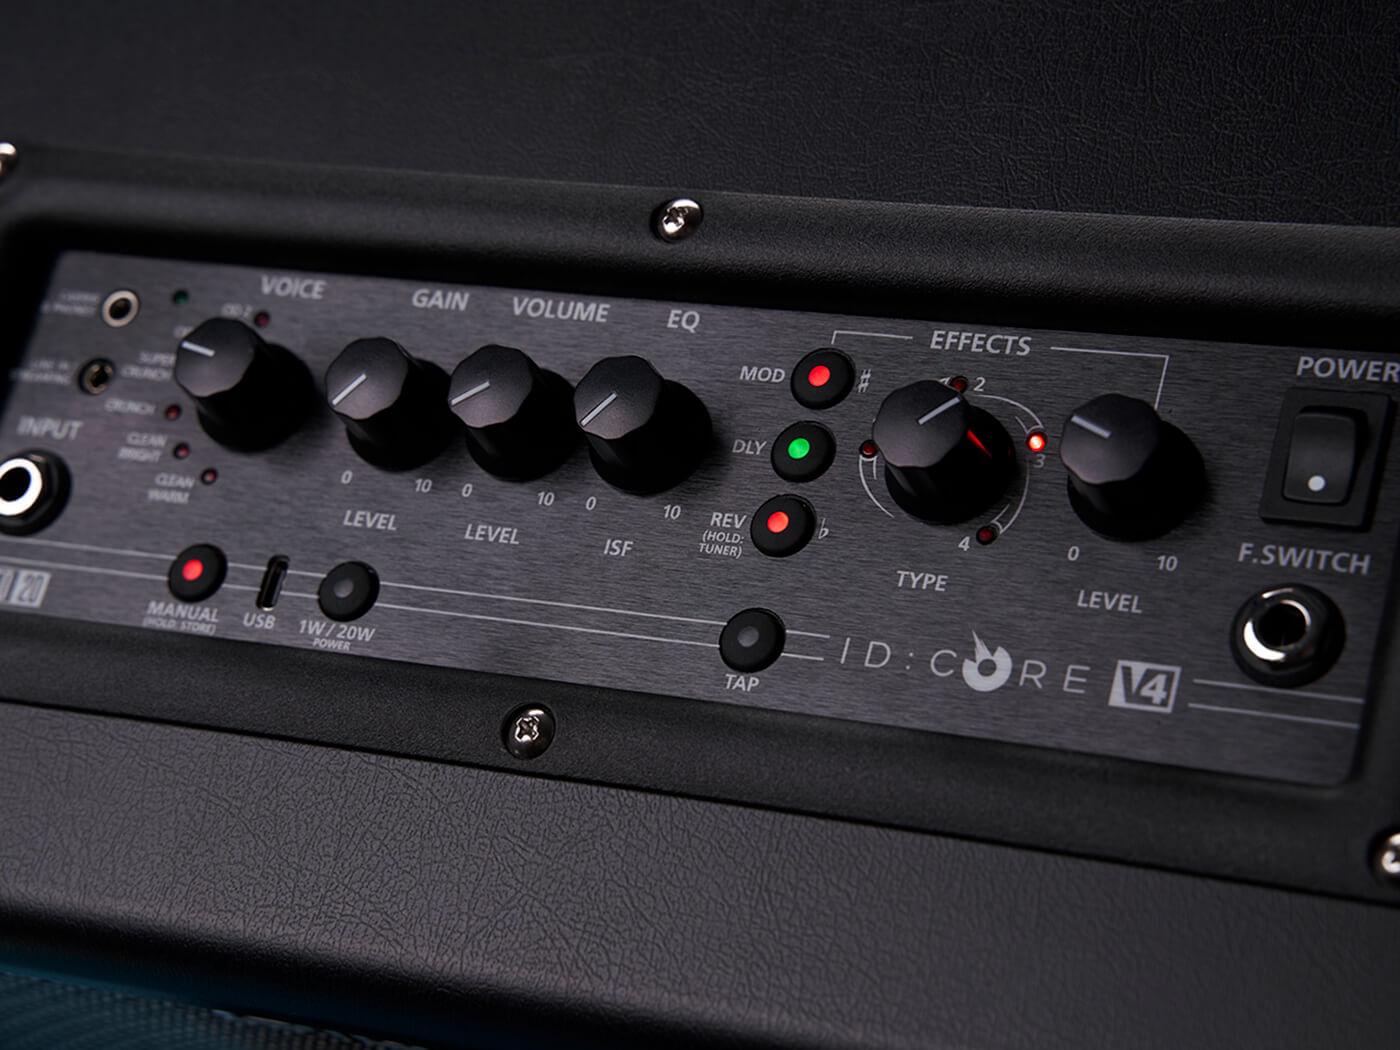 The ID:Core V4’s control panel, photo by Adam Gasson